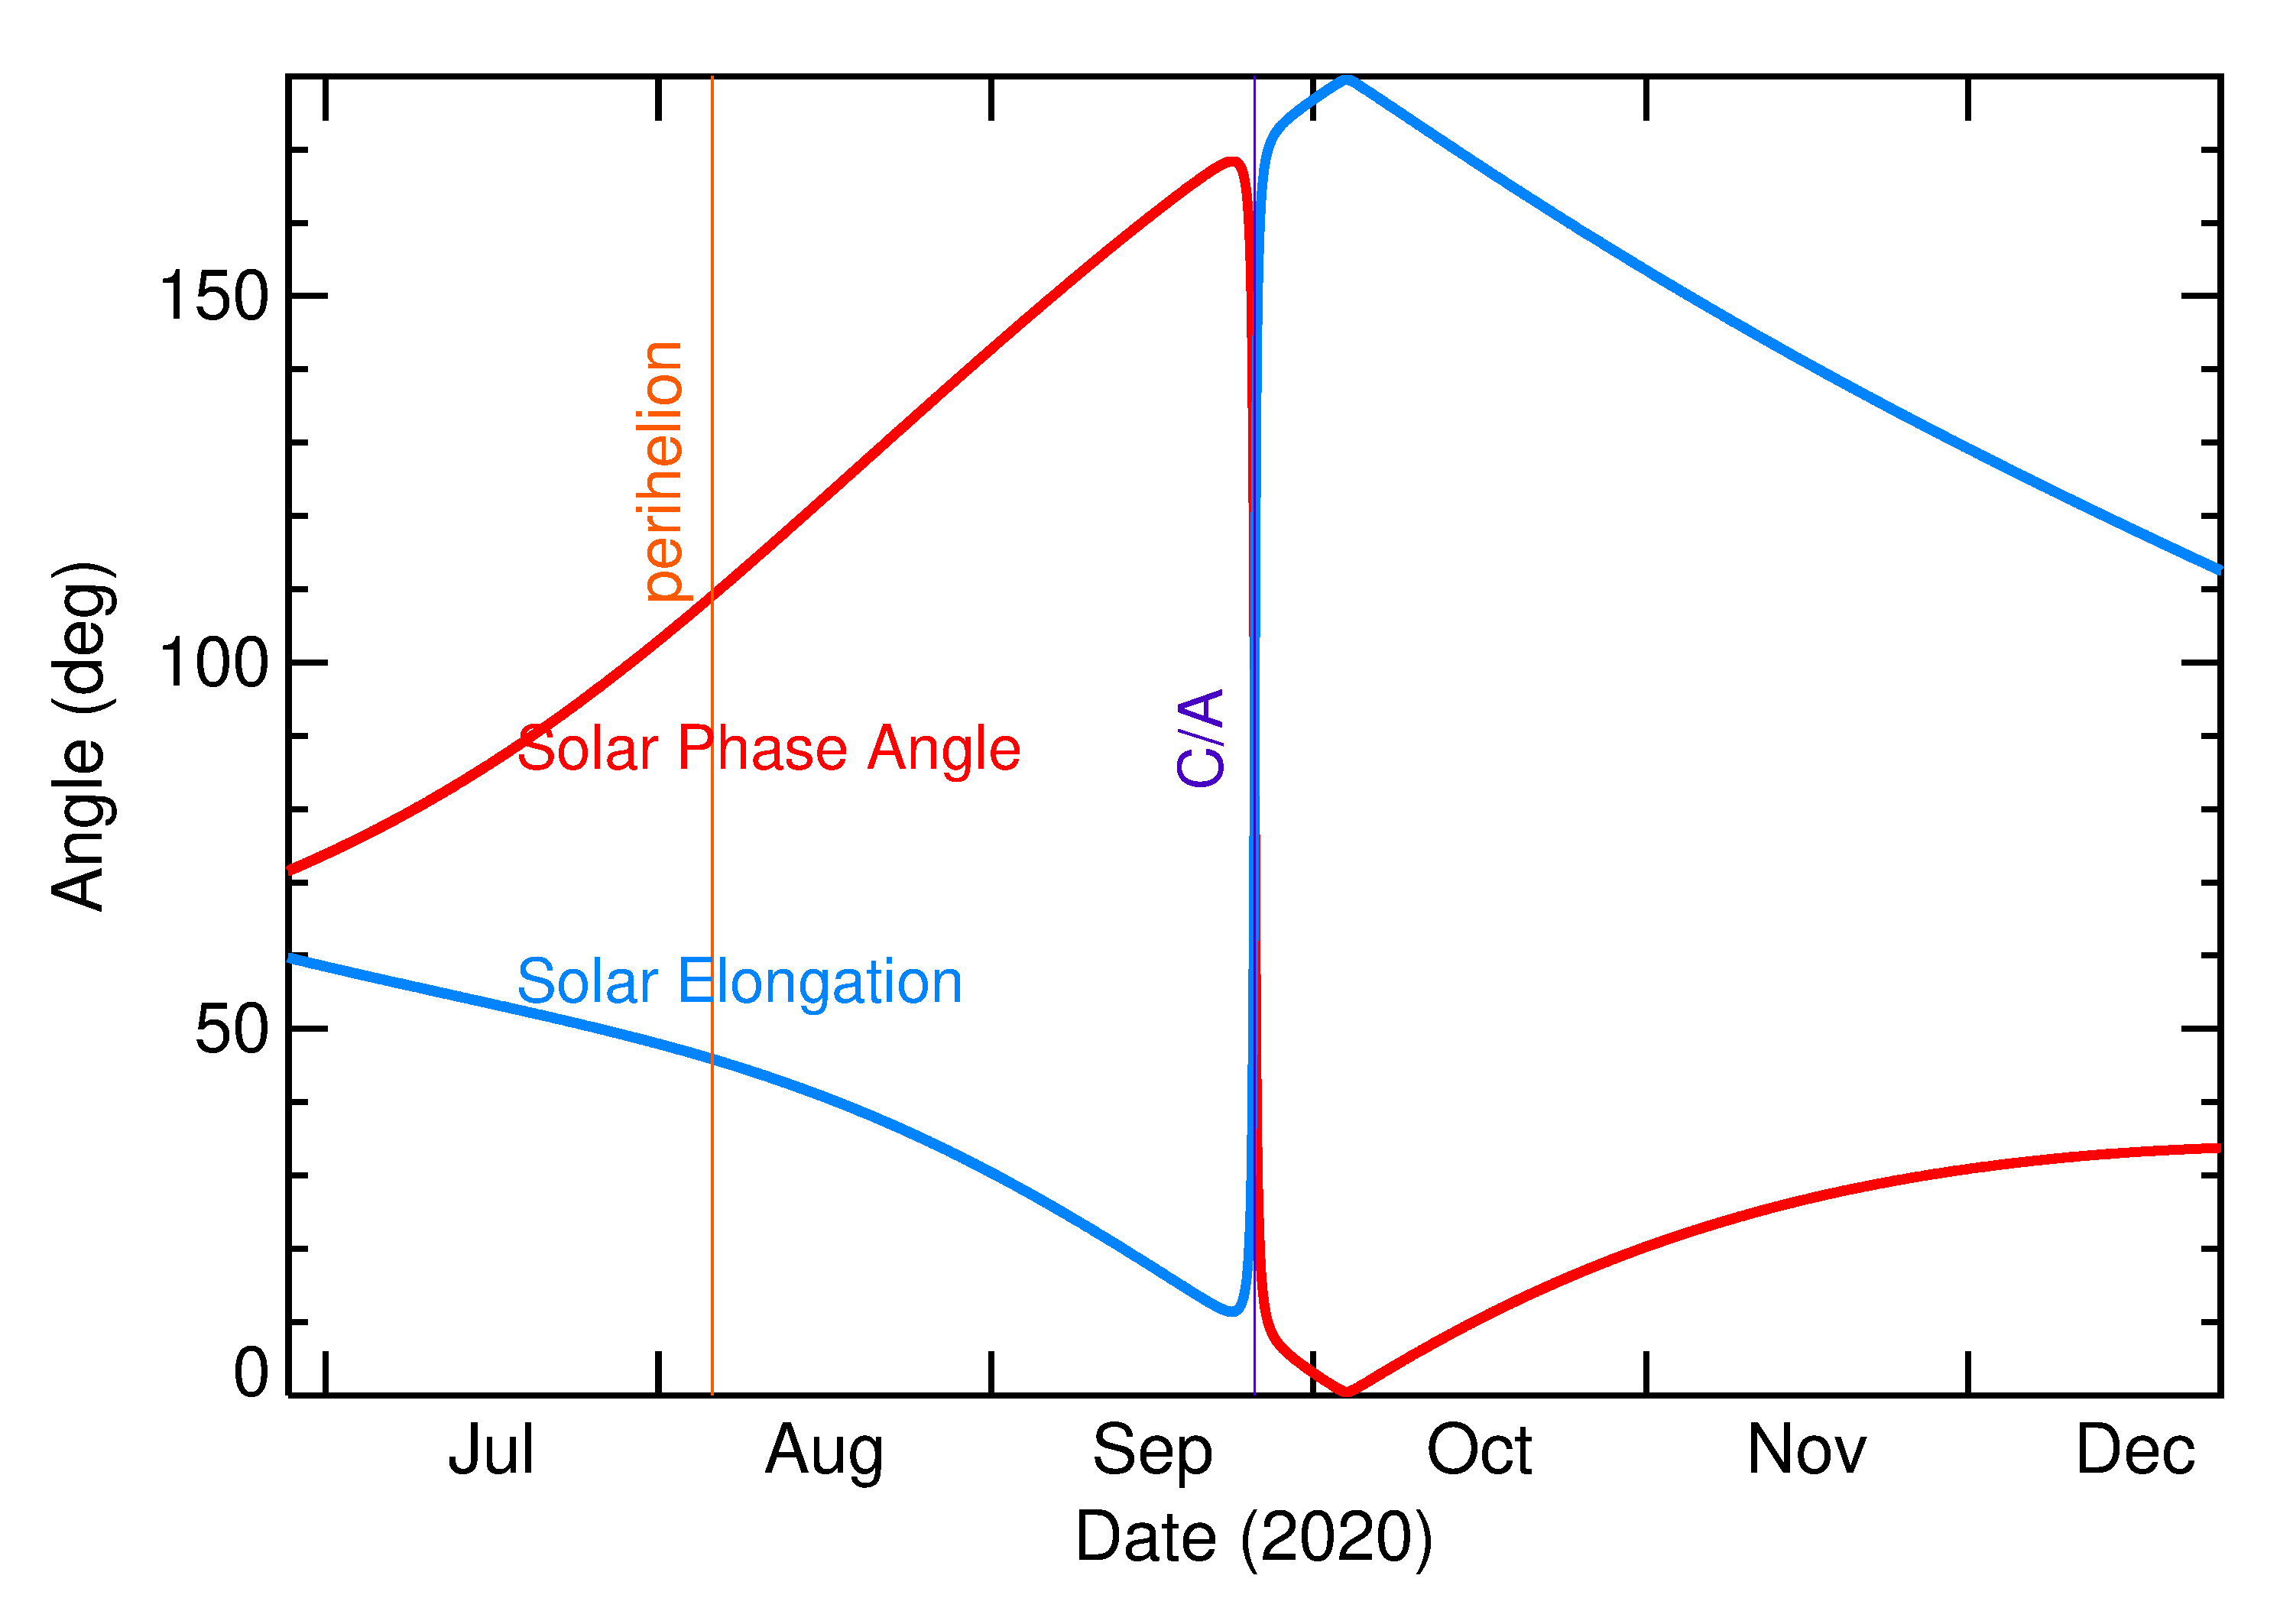 Solar Elongation and Solar Phase Angle of 2020 SN5 in the months around closest approach